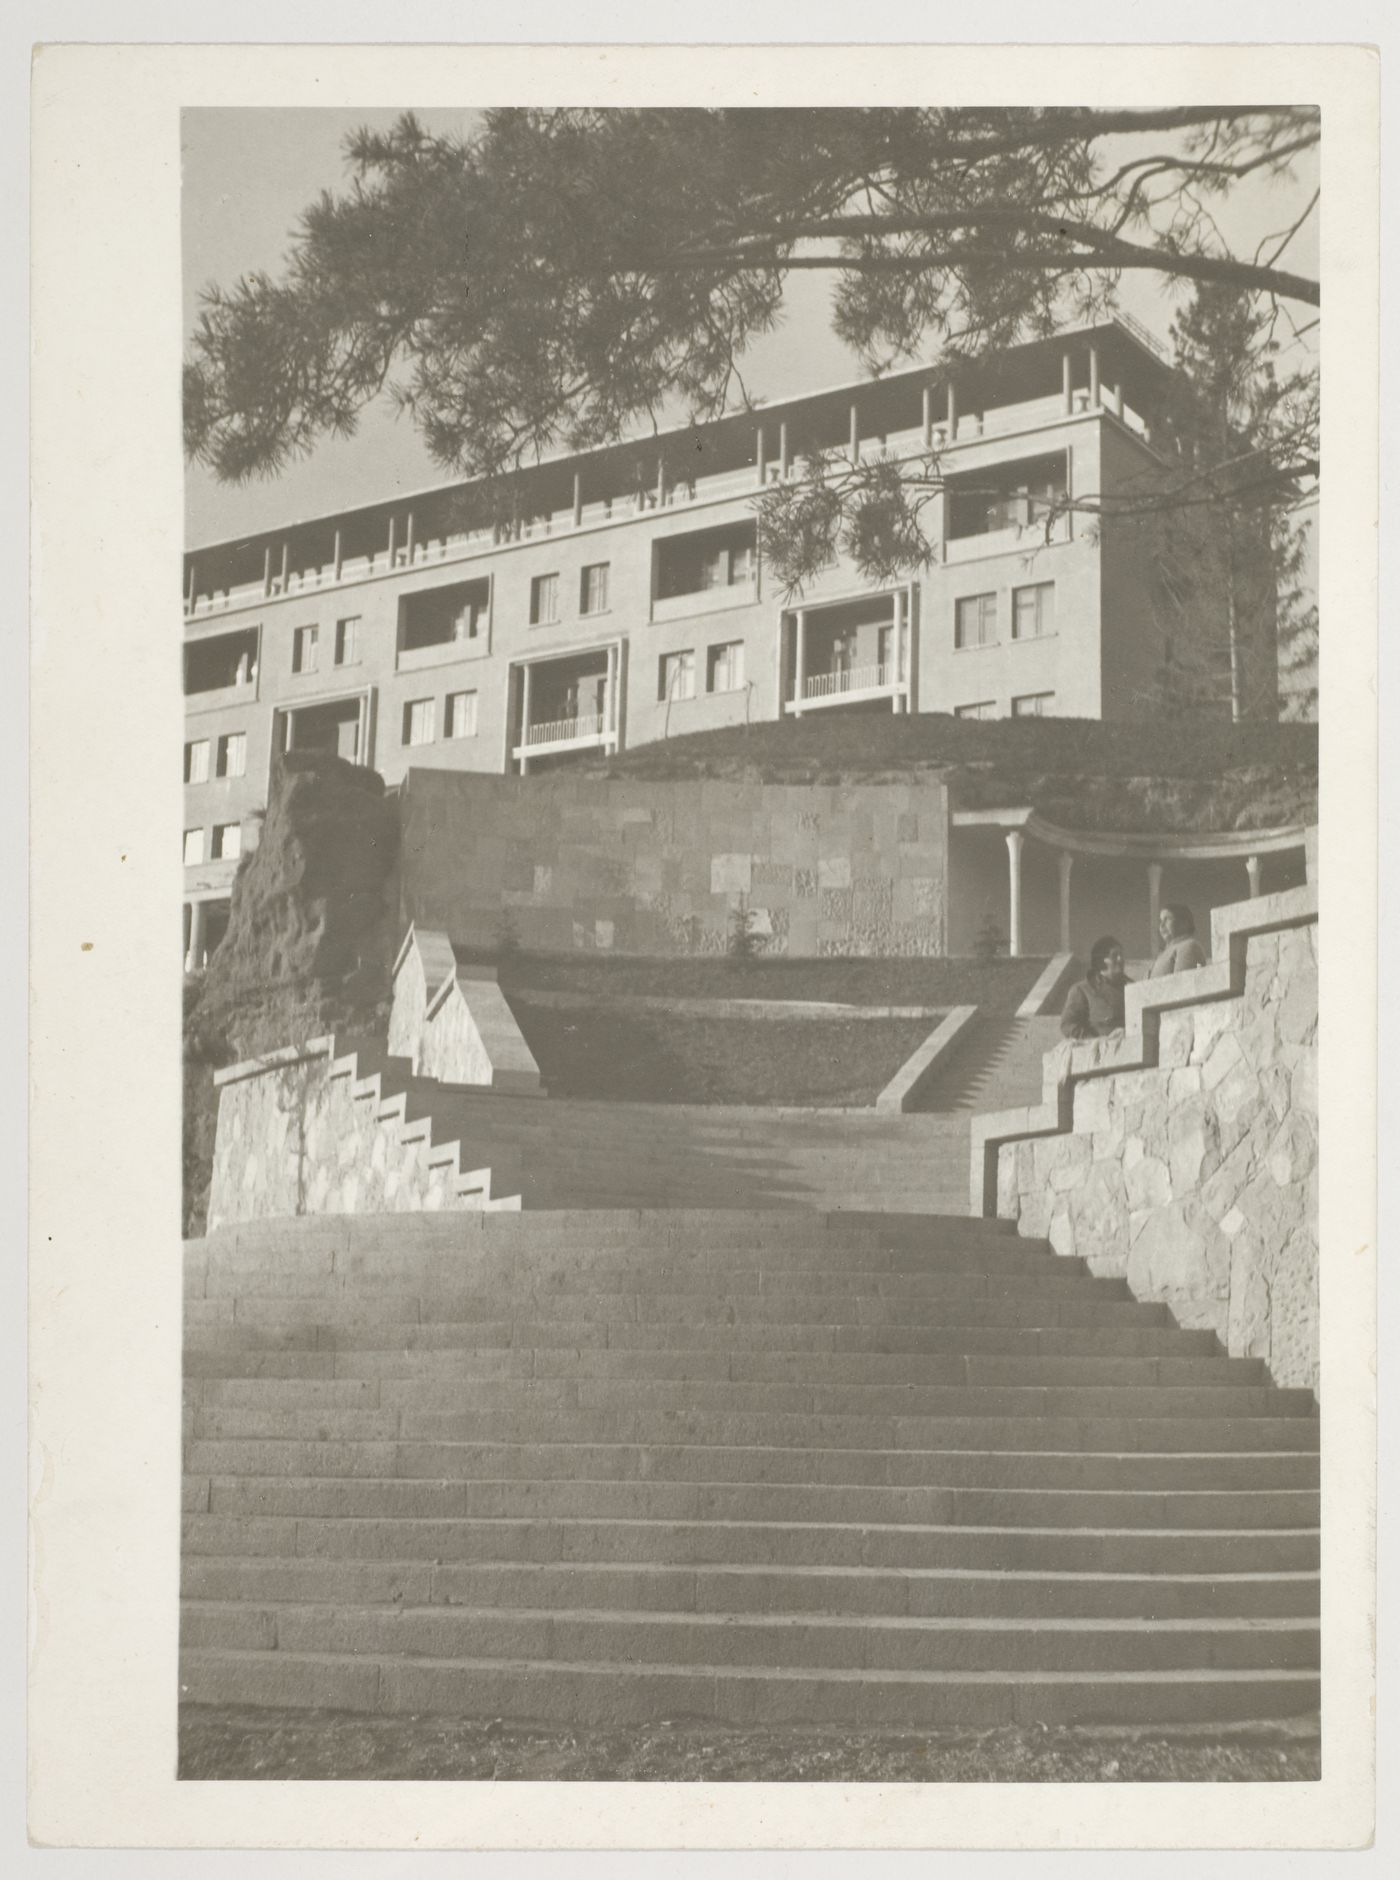 Exterior view of stairs to the Ordzhonikidze Sanatorium for the People's Commissariat for Heavy Industry (Narkomtyazhprom), Kislovodsk, Soviet Union (now in Russia)